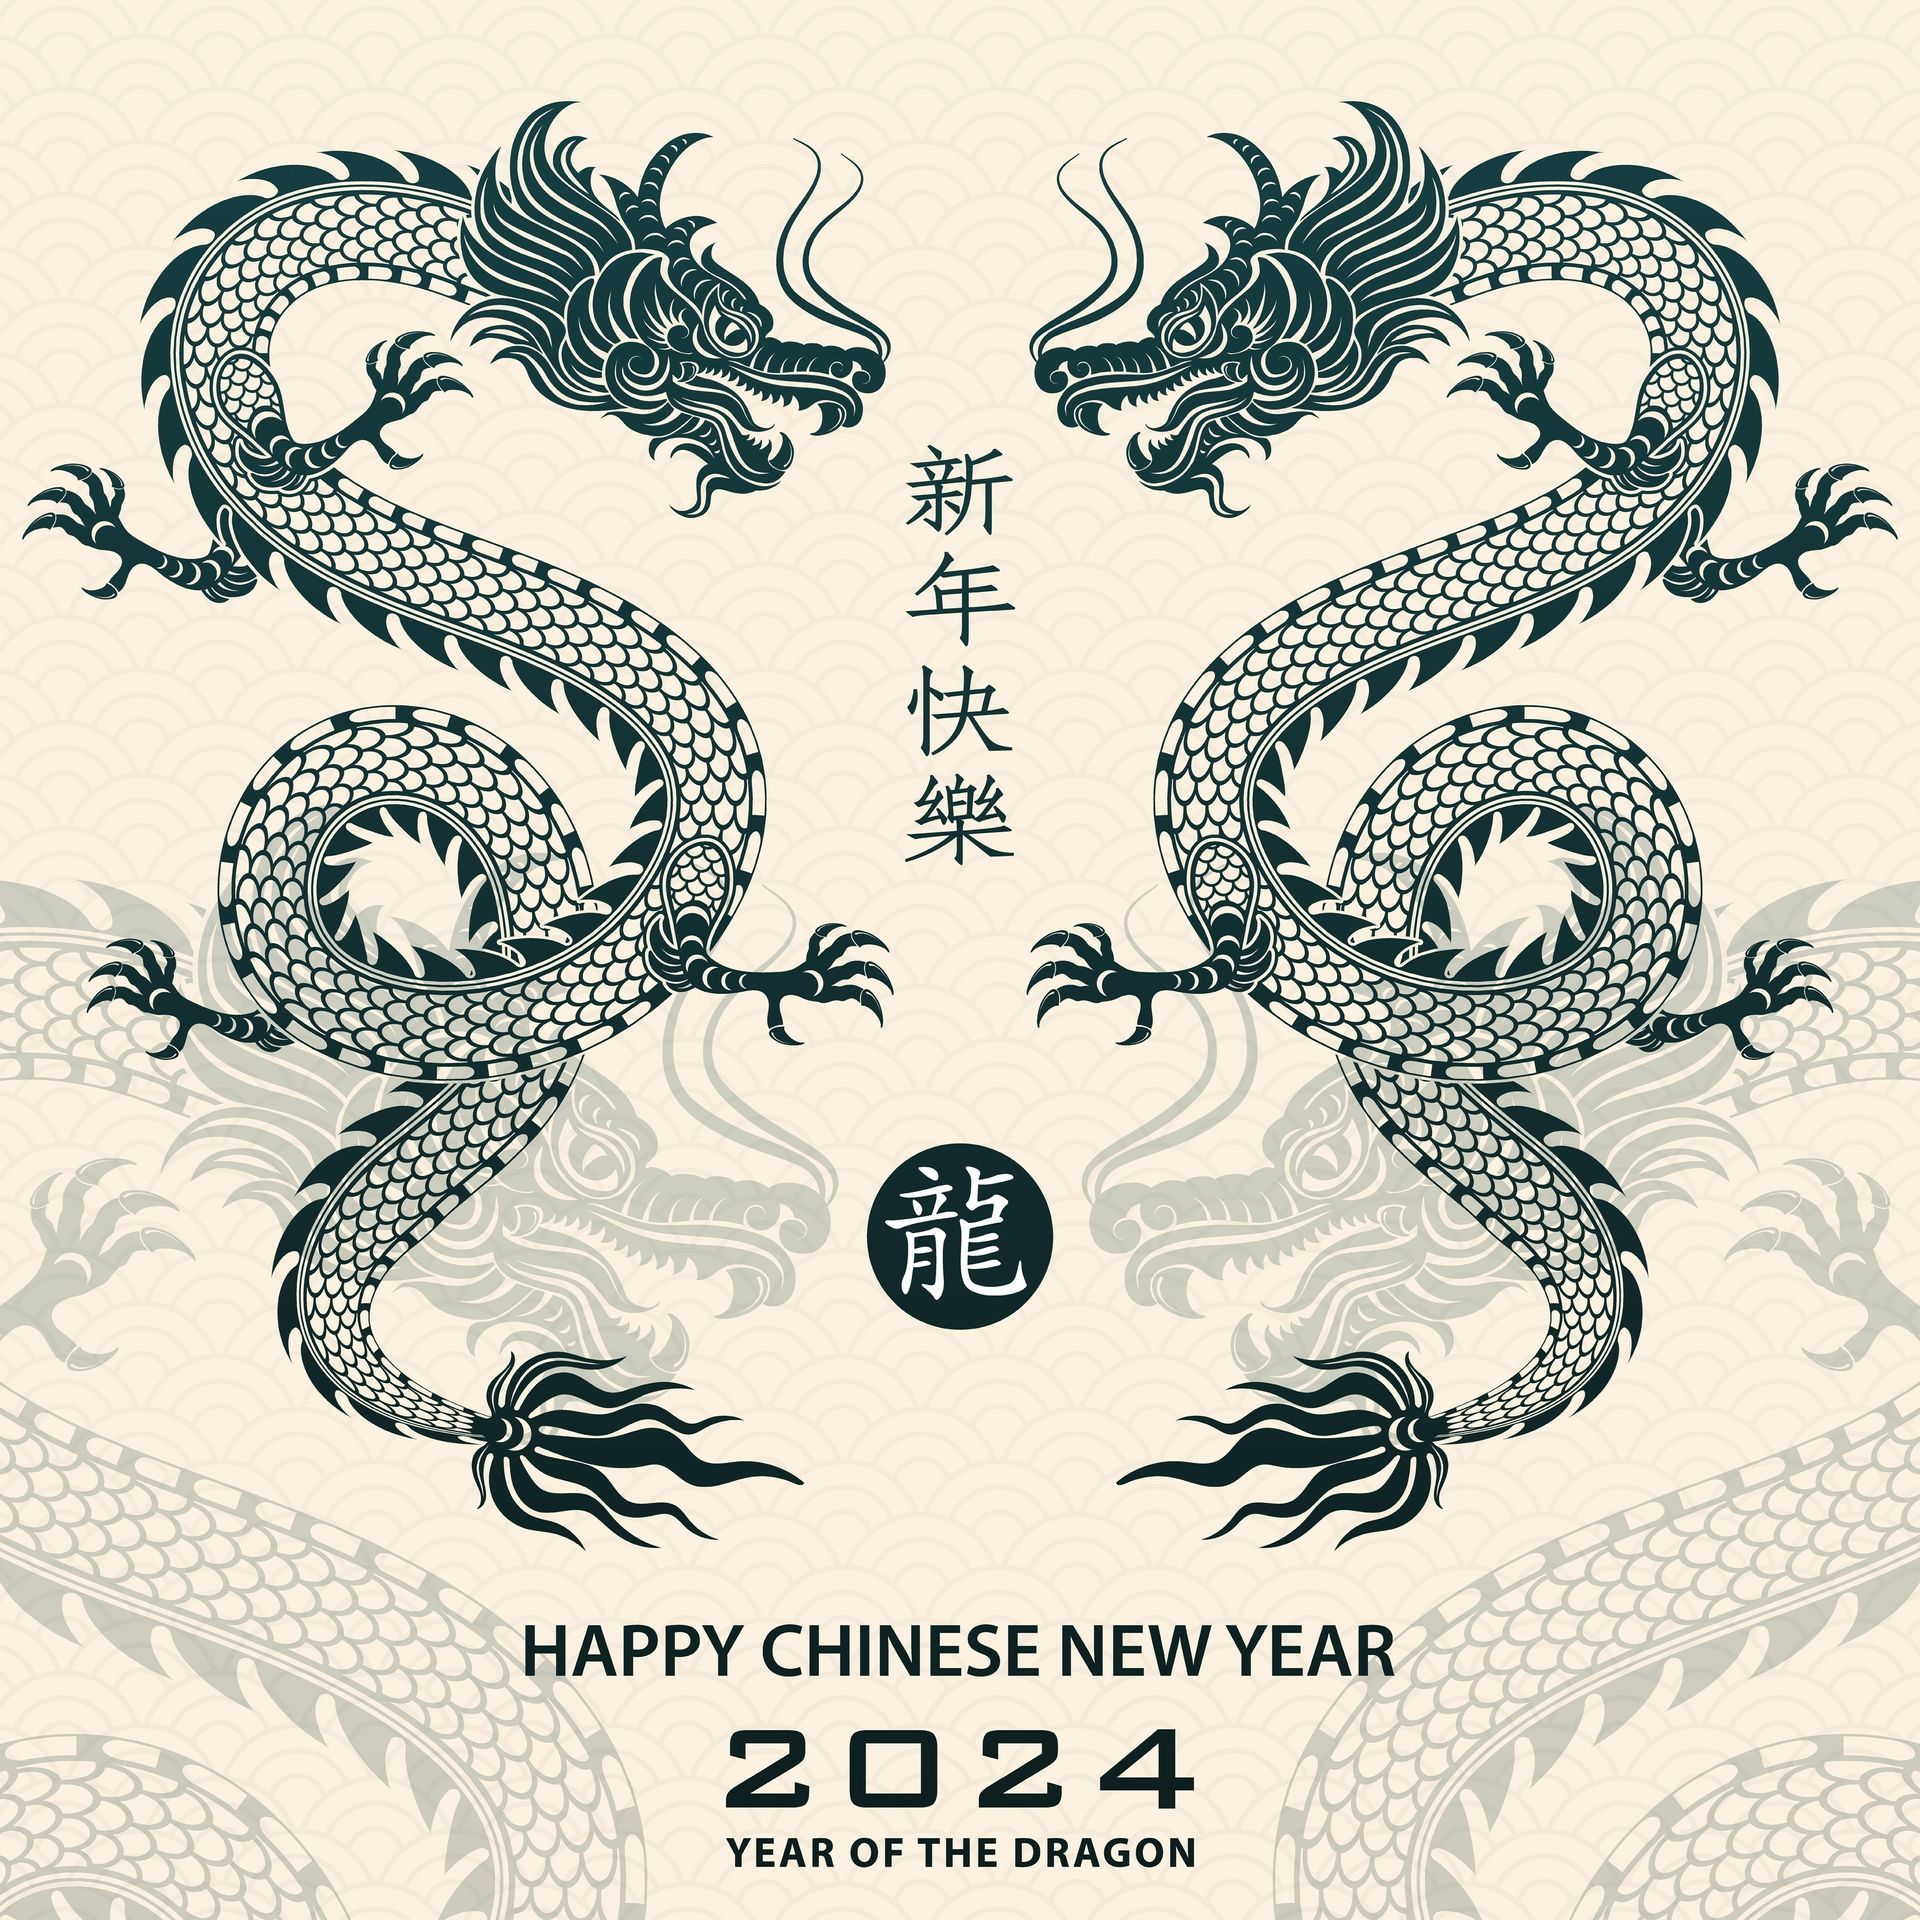 Image of two green dragons representing the Chinese Wood Dragon year of 2024